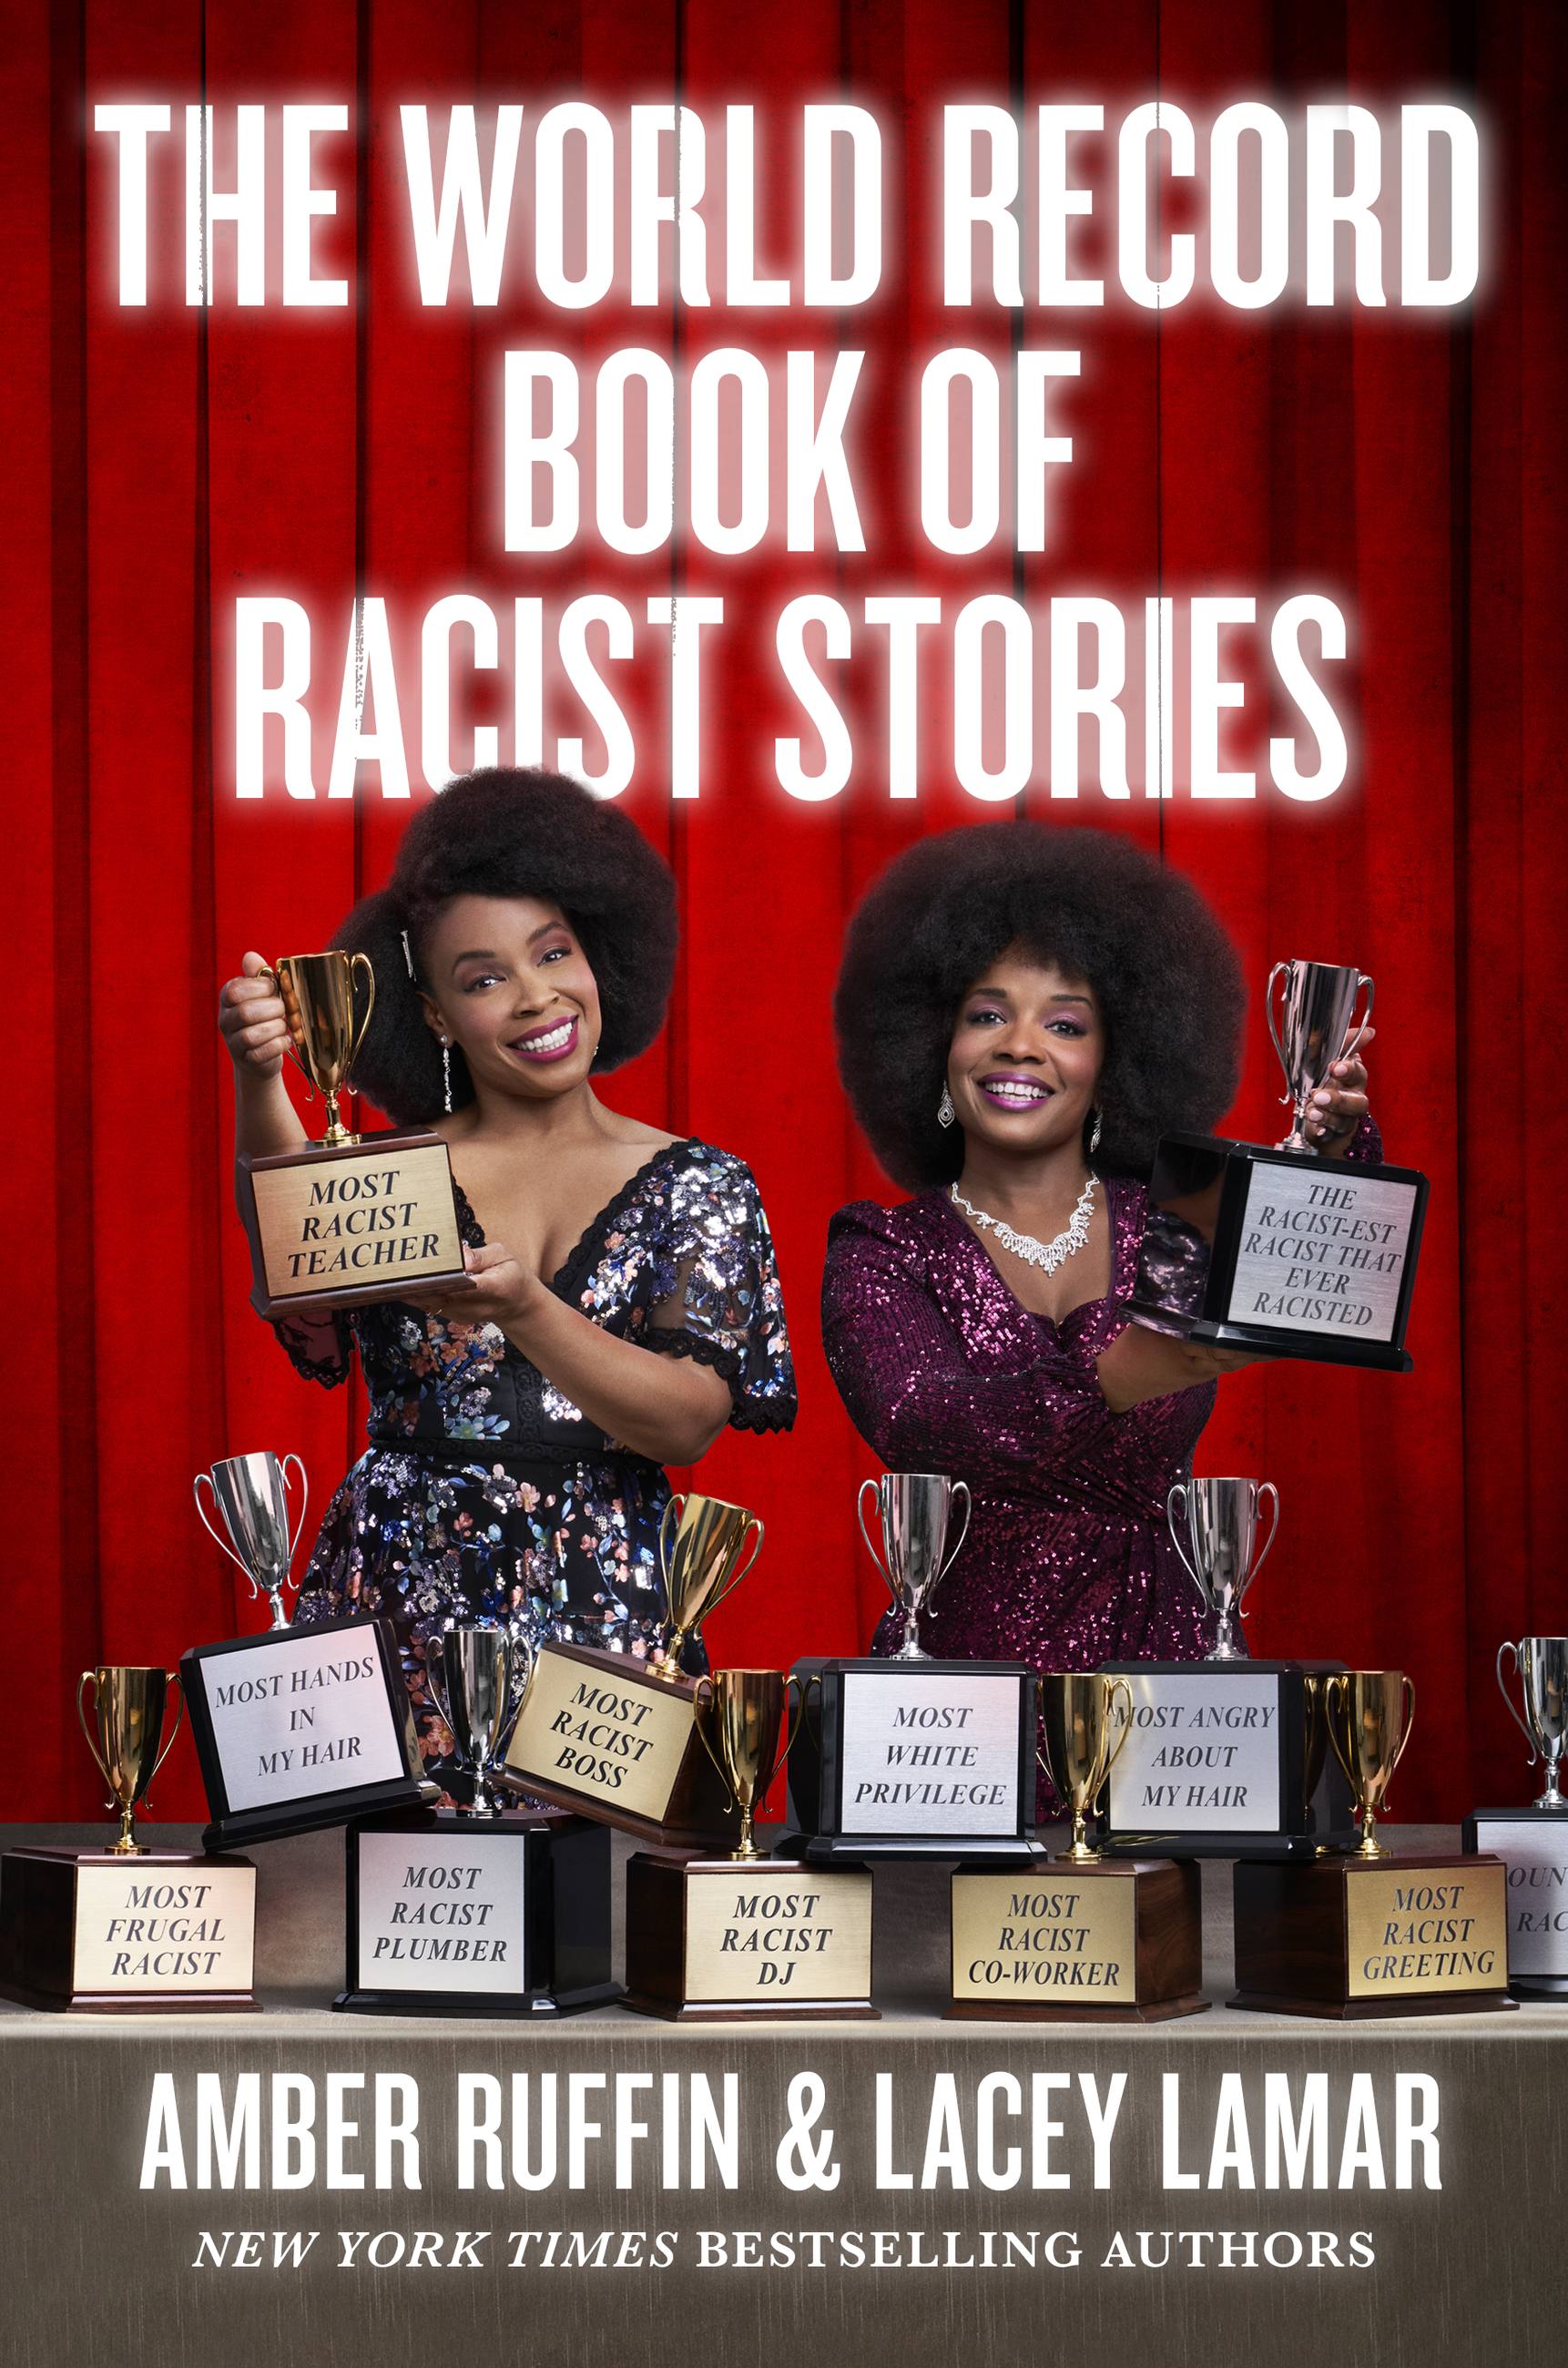 The World Record Book of Racist Stories by Amber Ruffin  LACEY LAMAR  Hachette Book Group